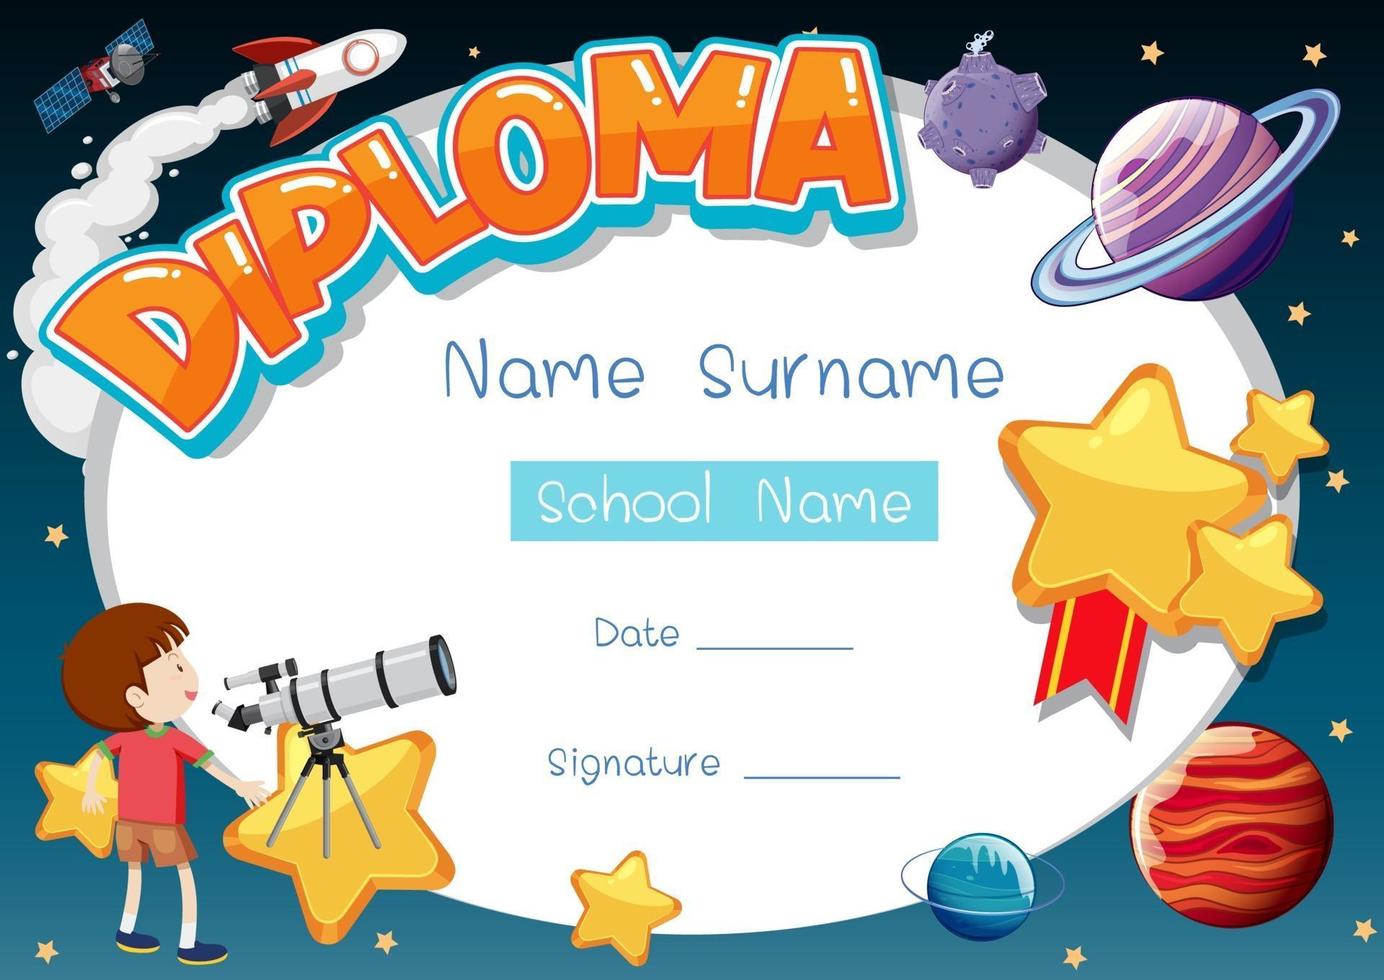 Diploma or certificate template for school kids vector